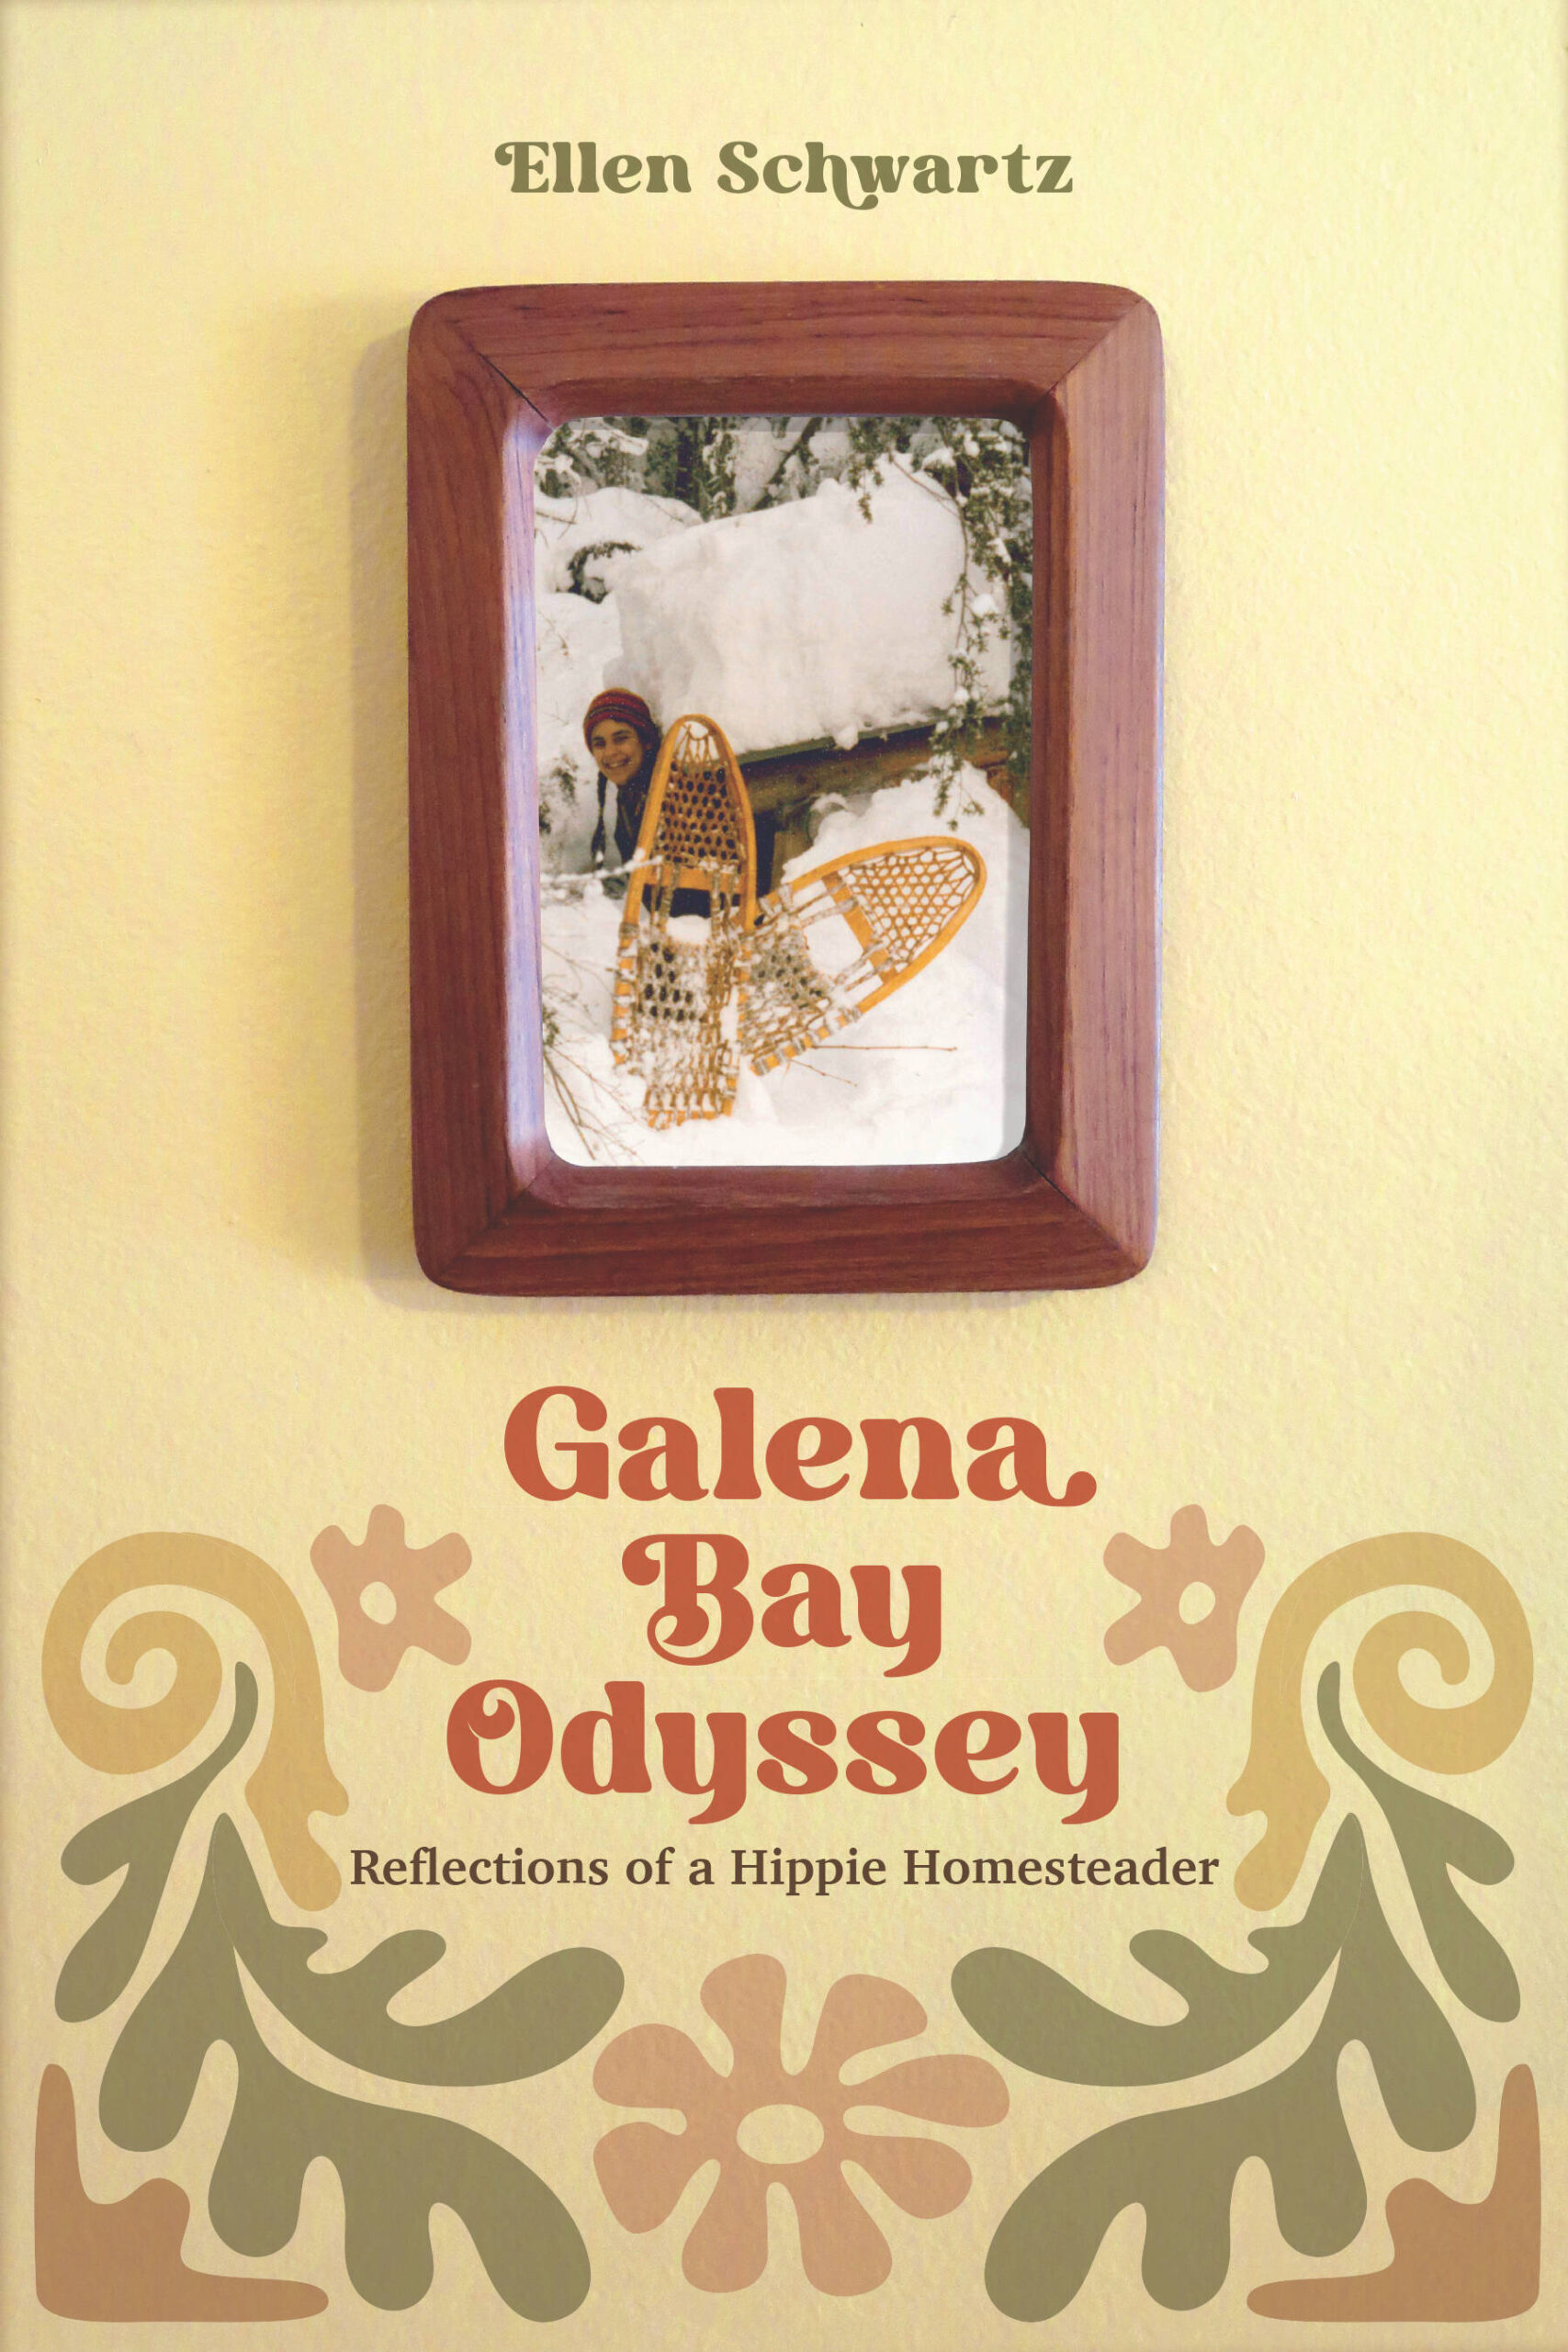 The cover of Galena Bay Odyssey. (Contributed)